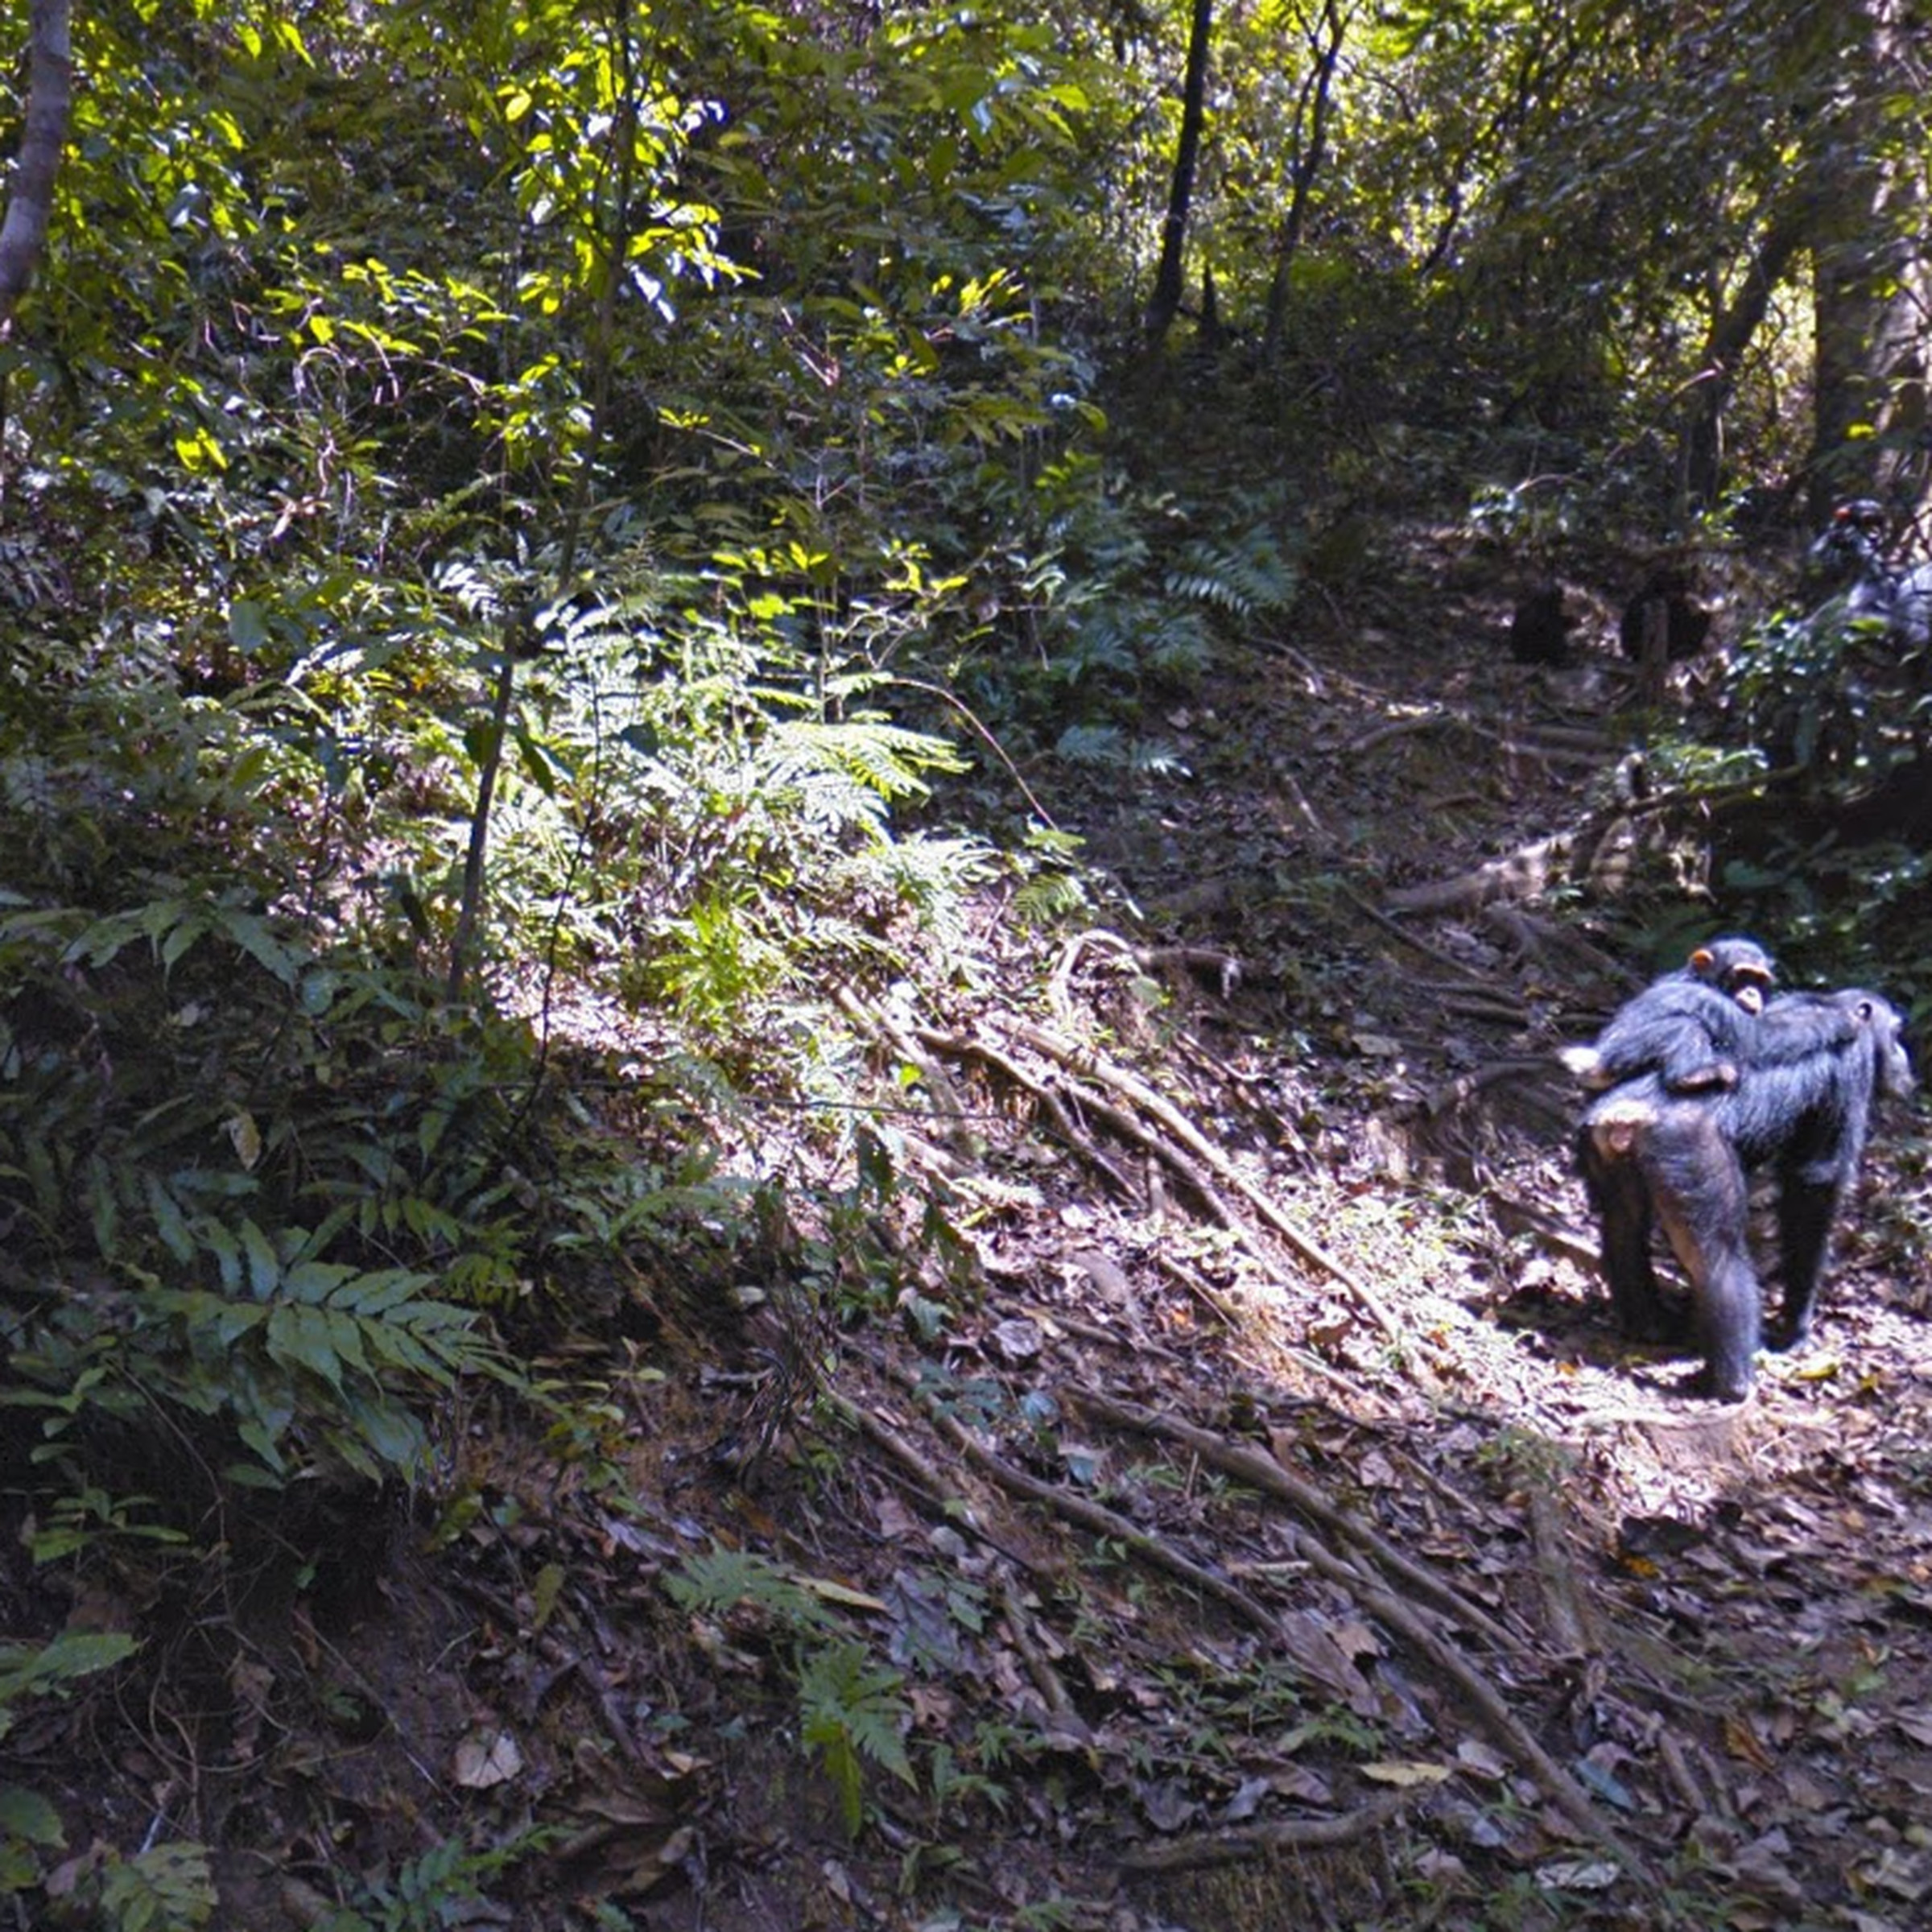 Screenshot from Google Street View trek of Gombe National Park showing mother chimpanzee with her child